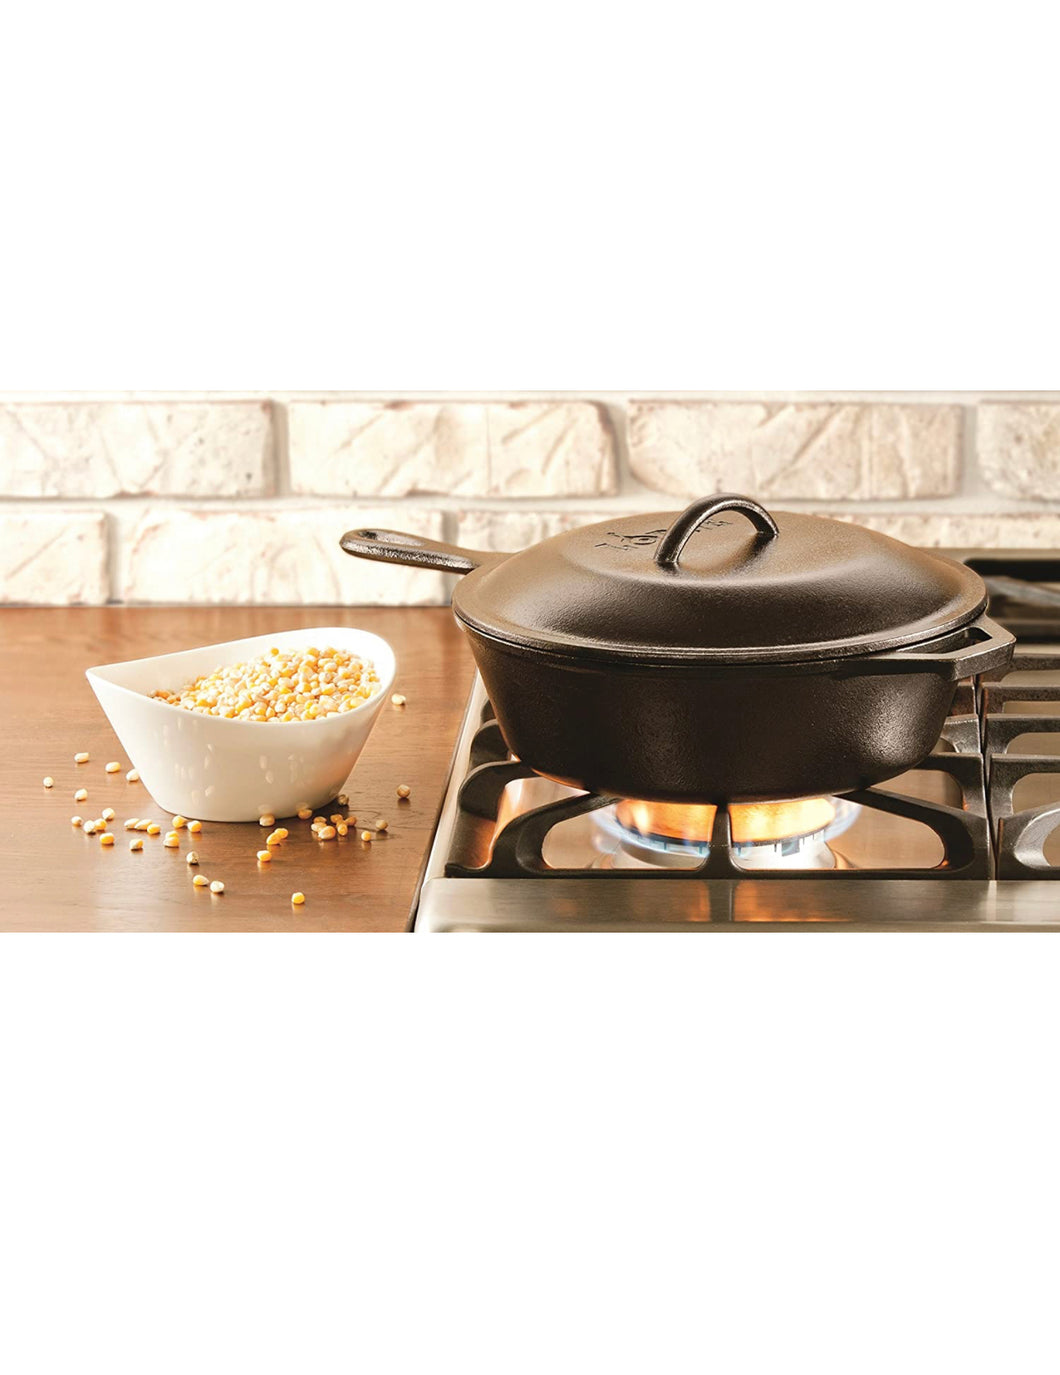 LODGE COOKWARE 3.2 Quart Cast Iron Covered Deep Skillet with Helper Handle